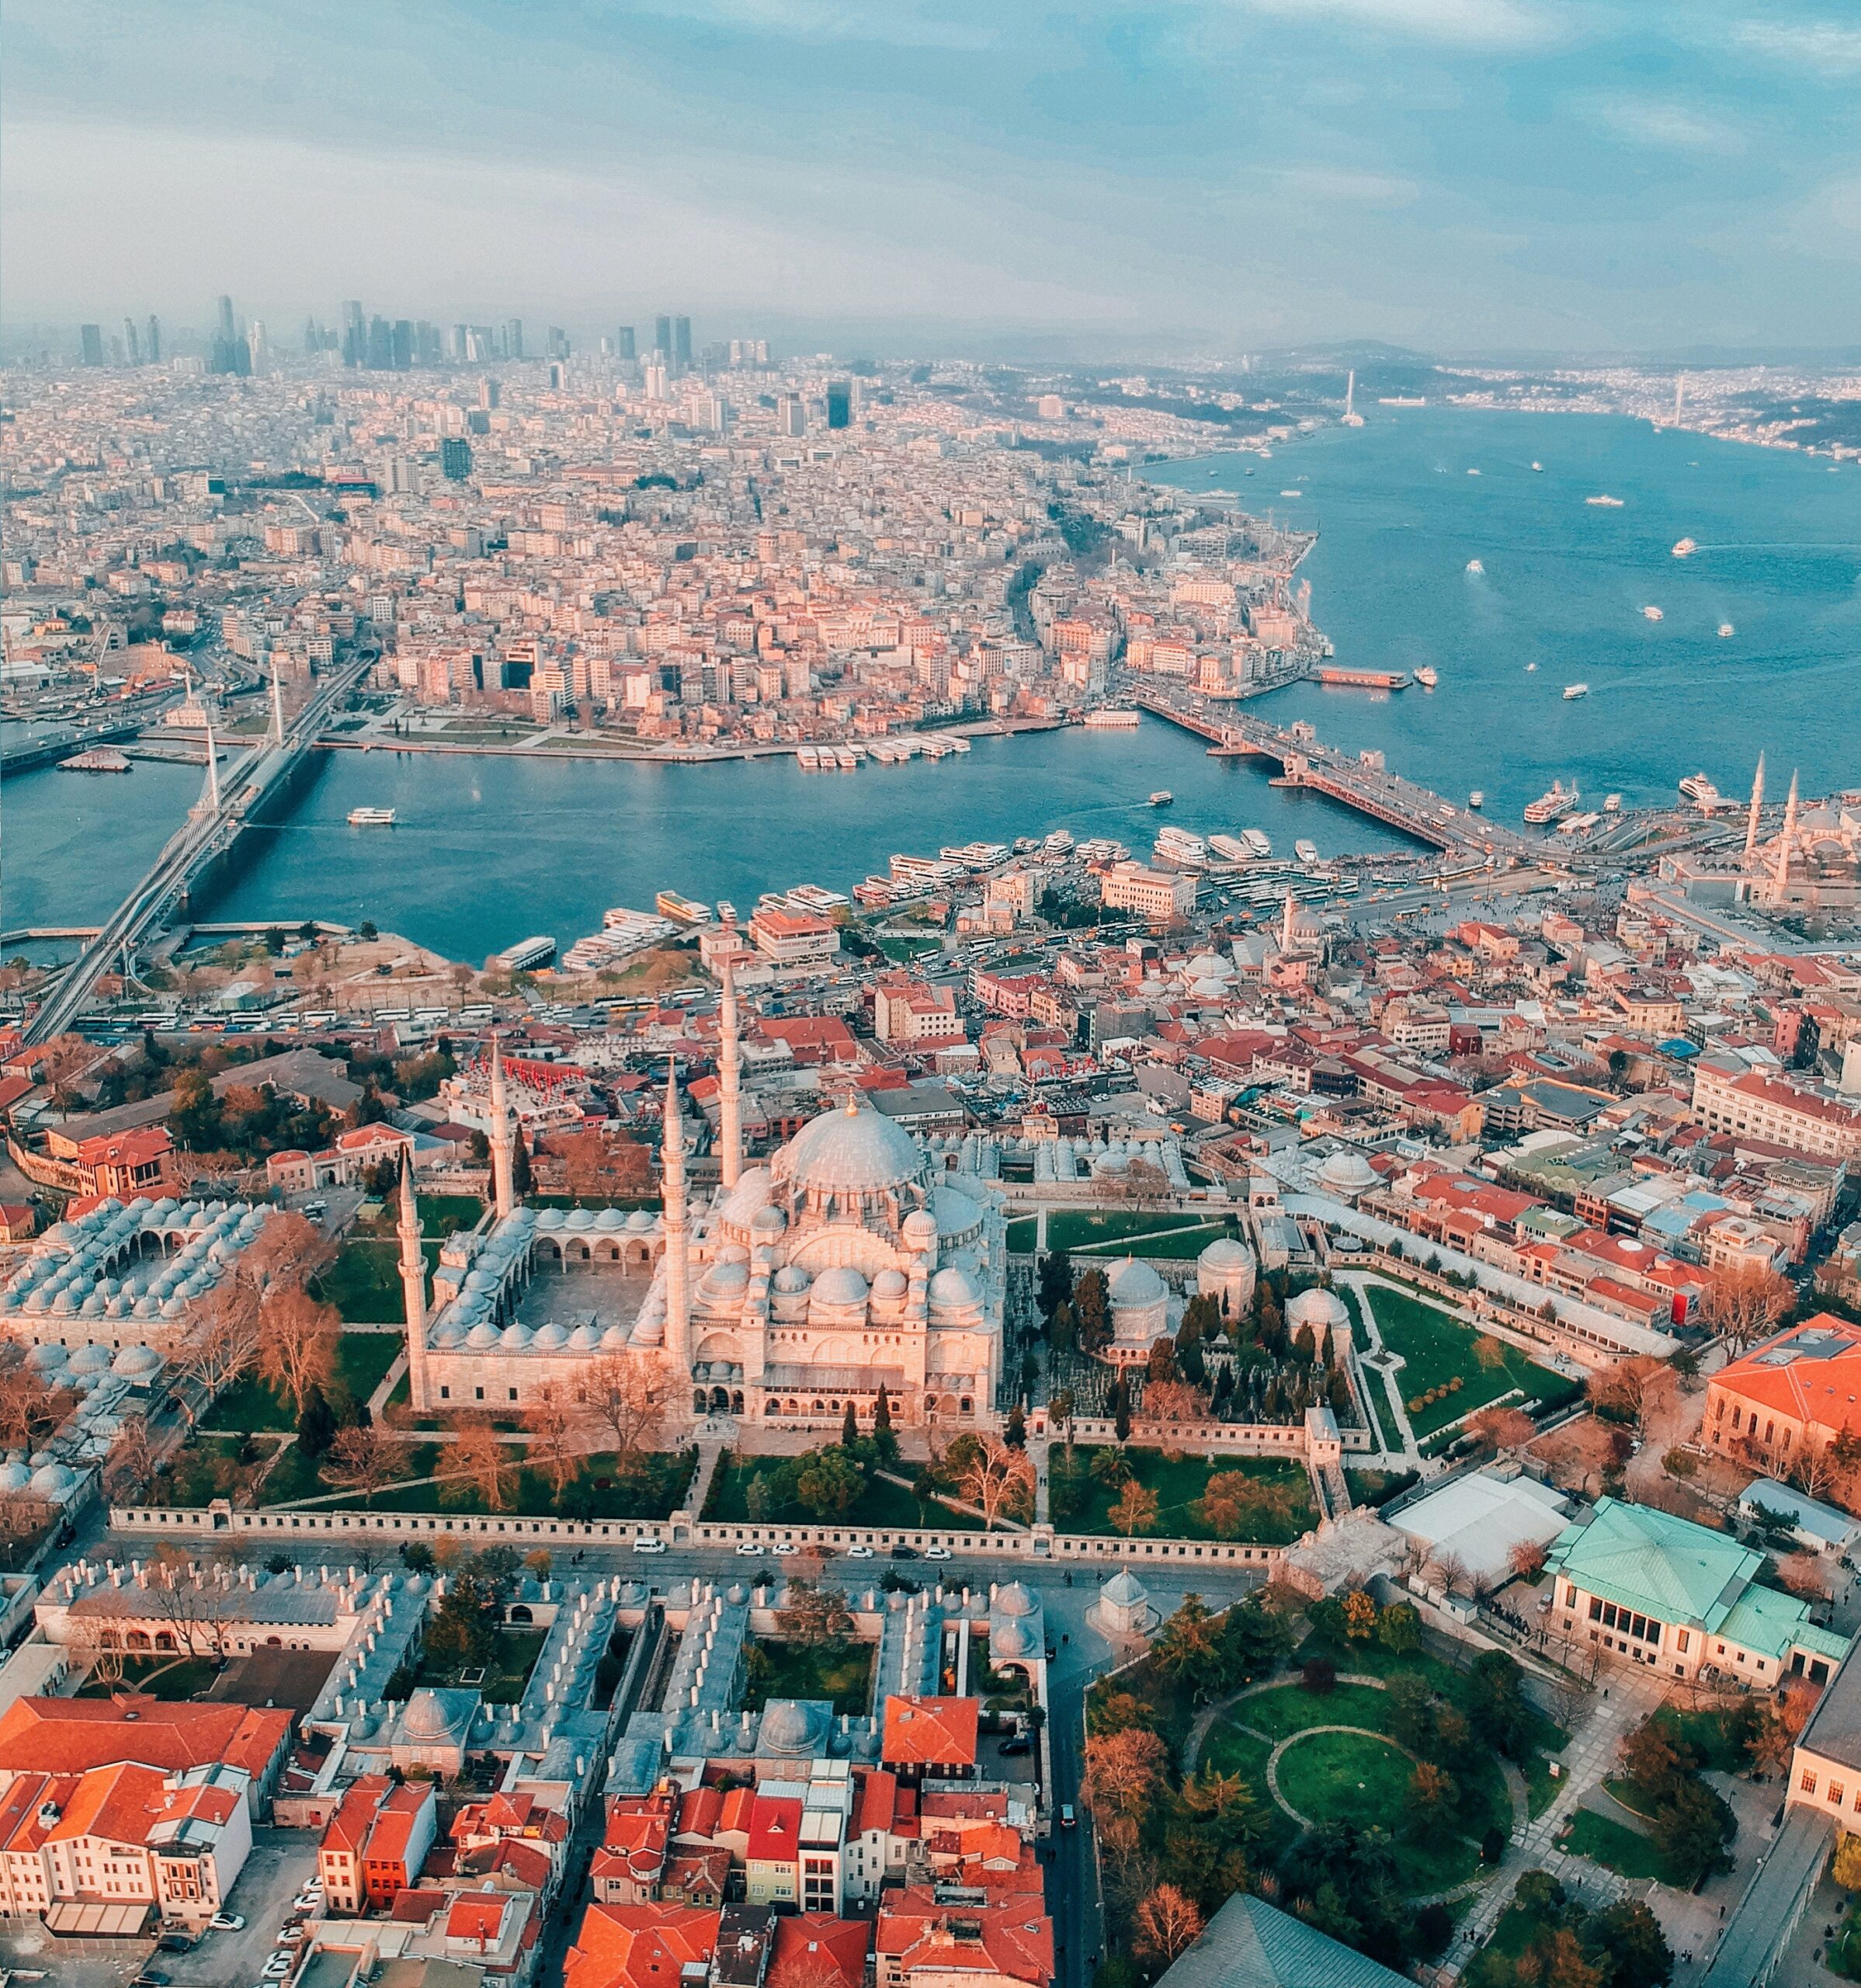 Istanbul Historical Peninsula – A Quick View